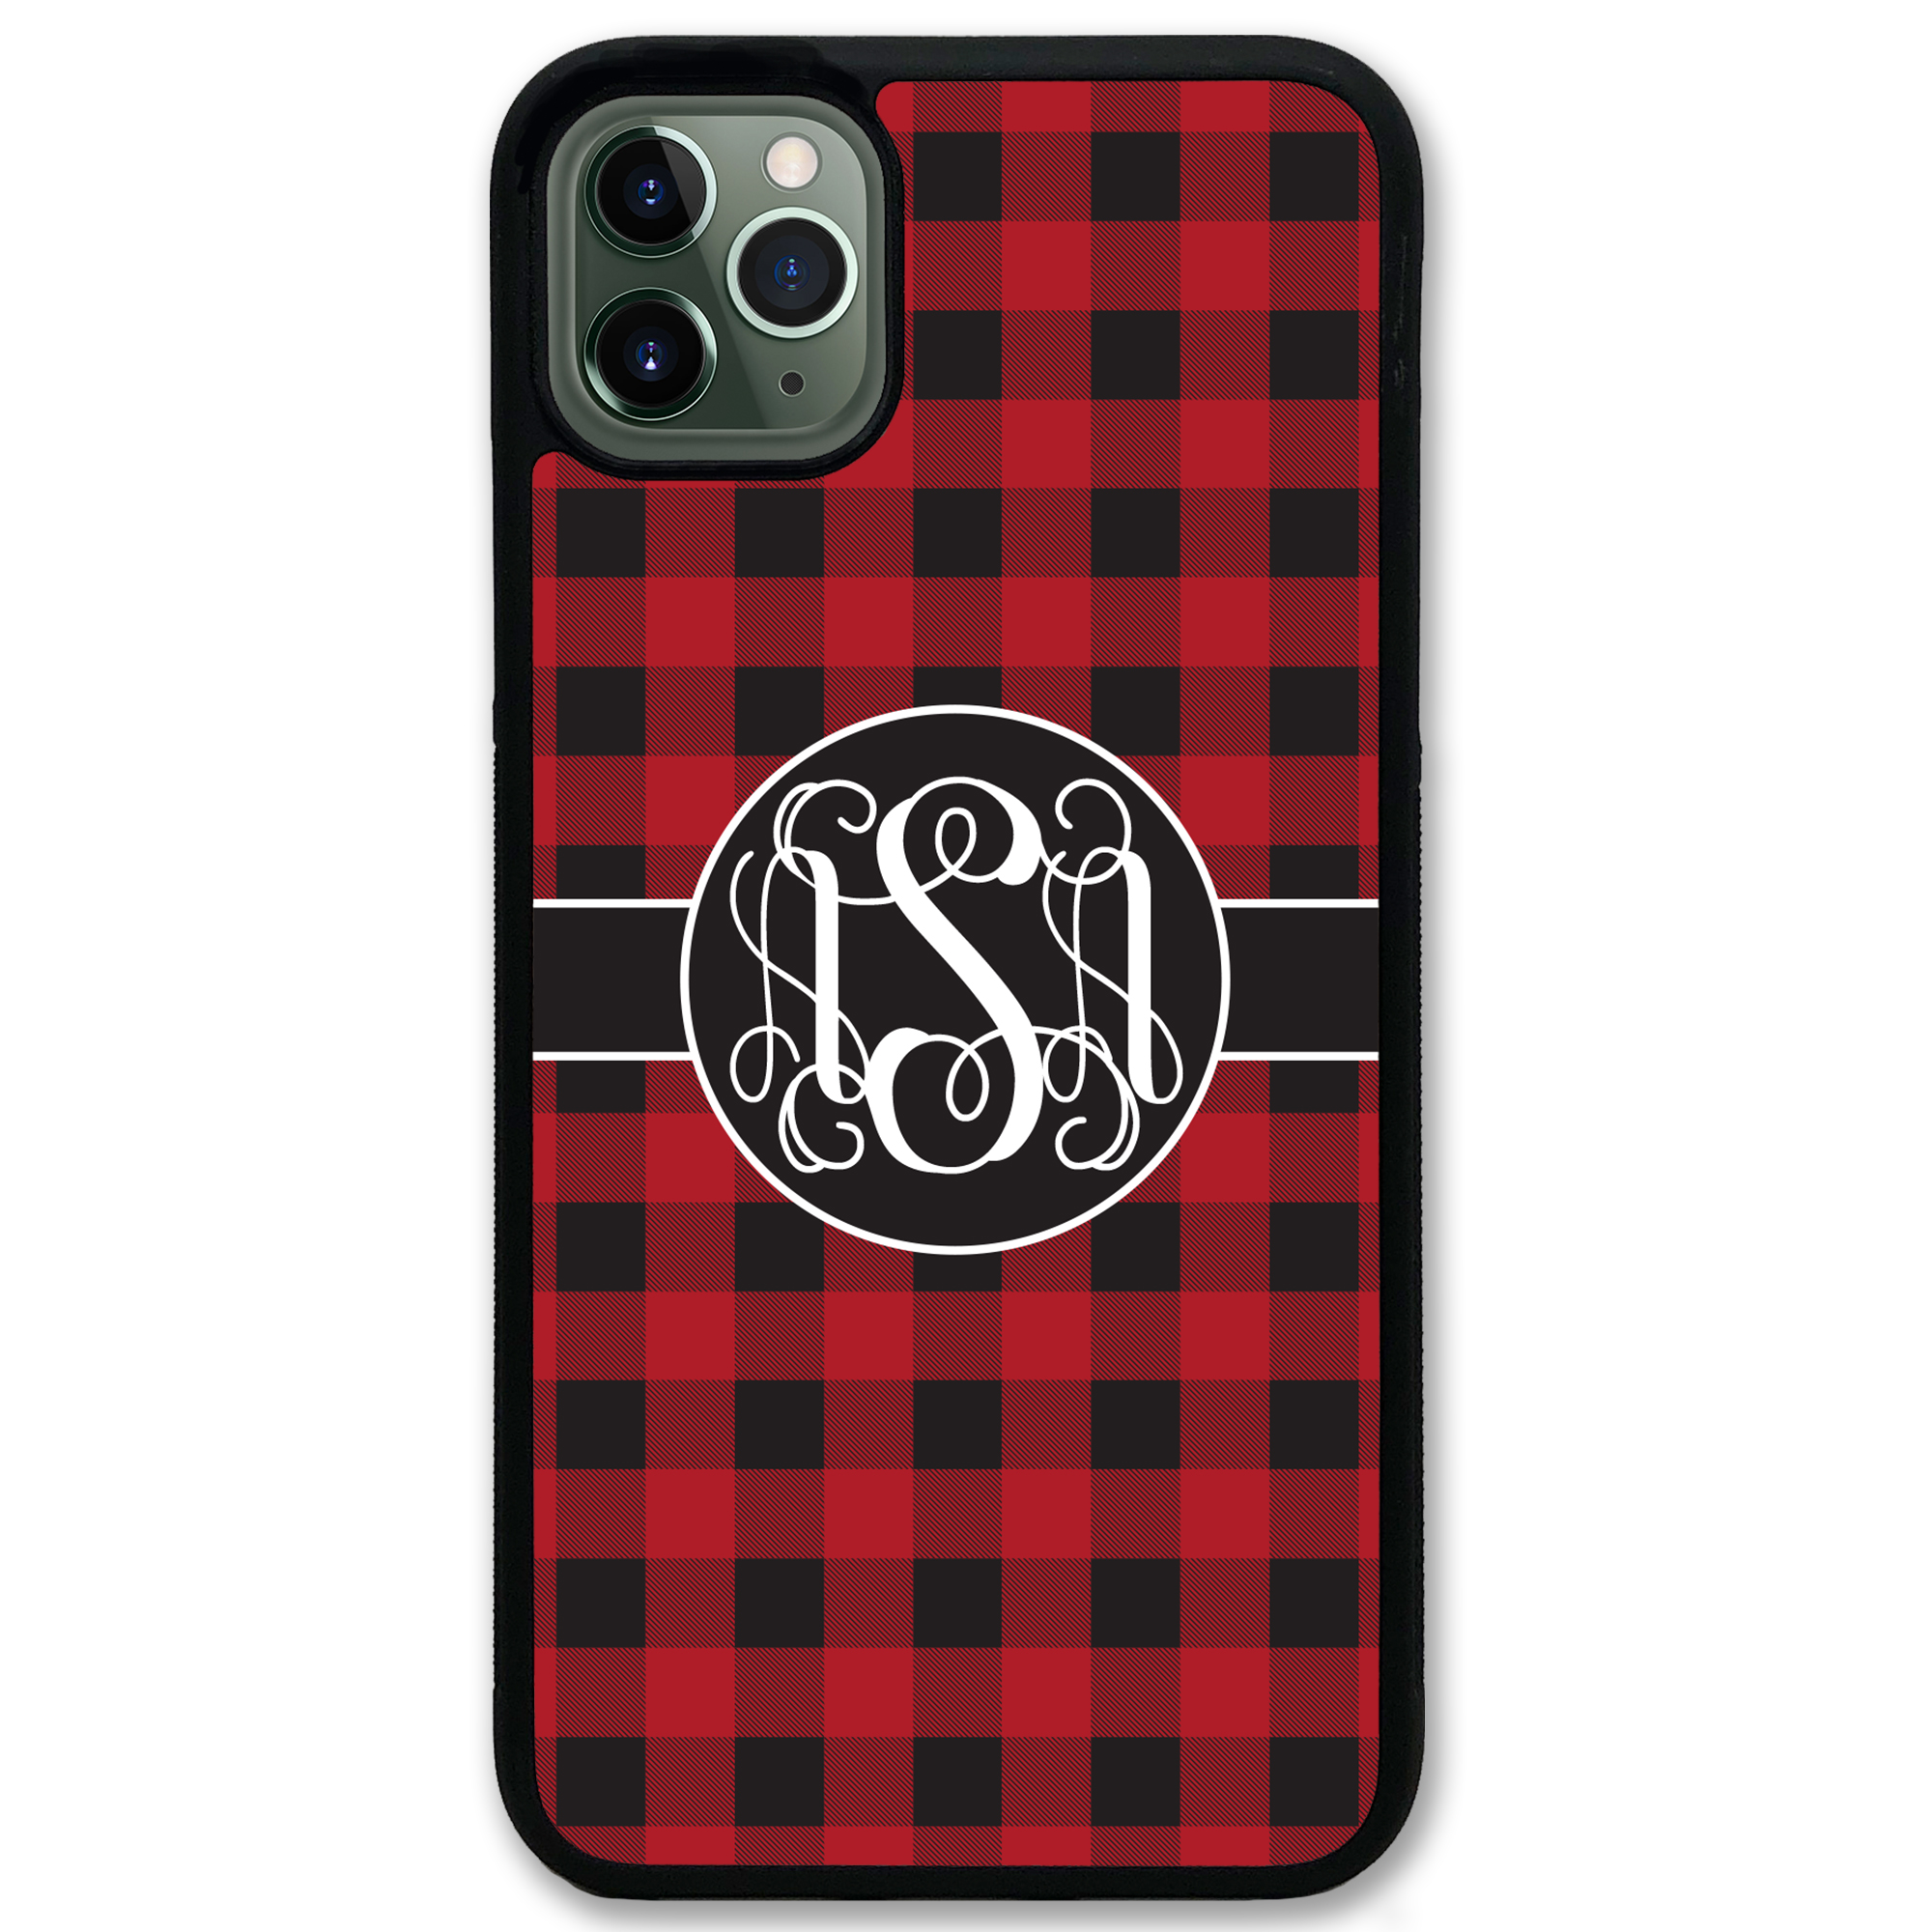 Buffalo Plaid Red Black White Iphone 11 Case Simply Customized